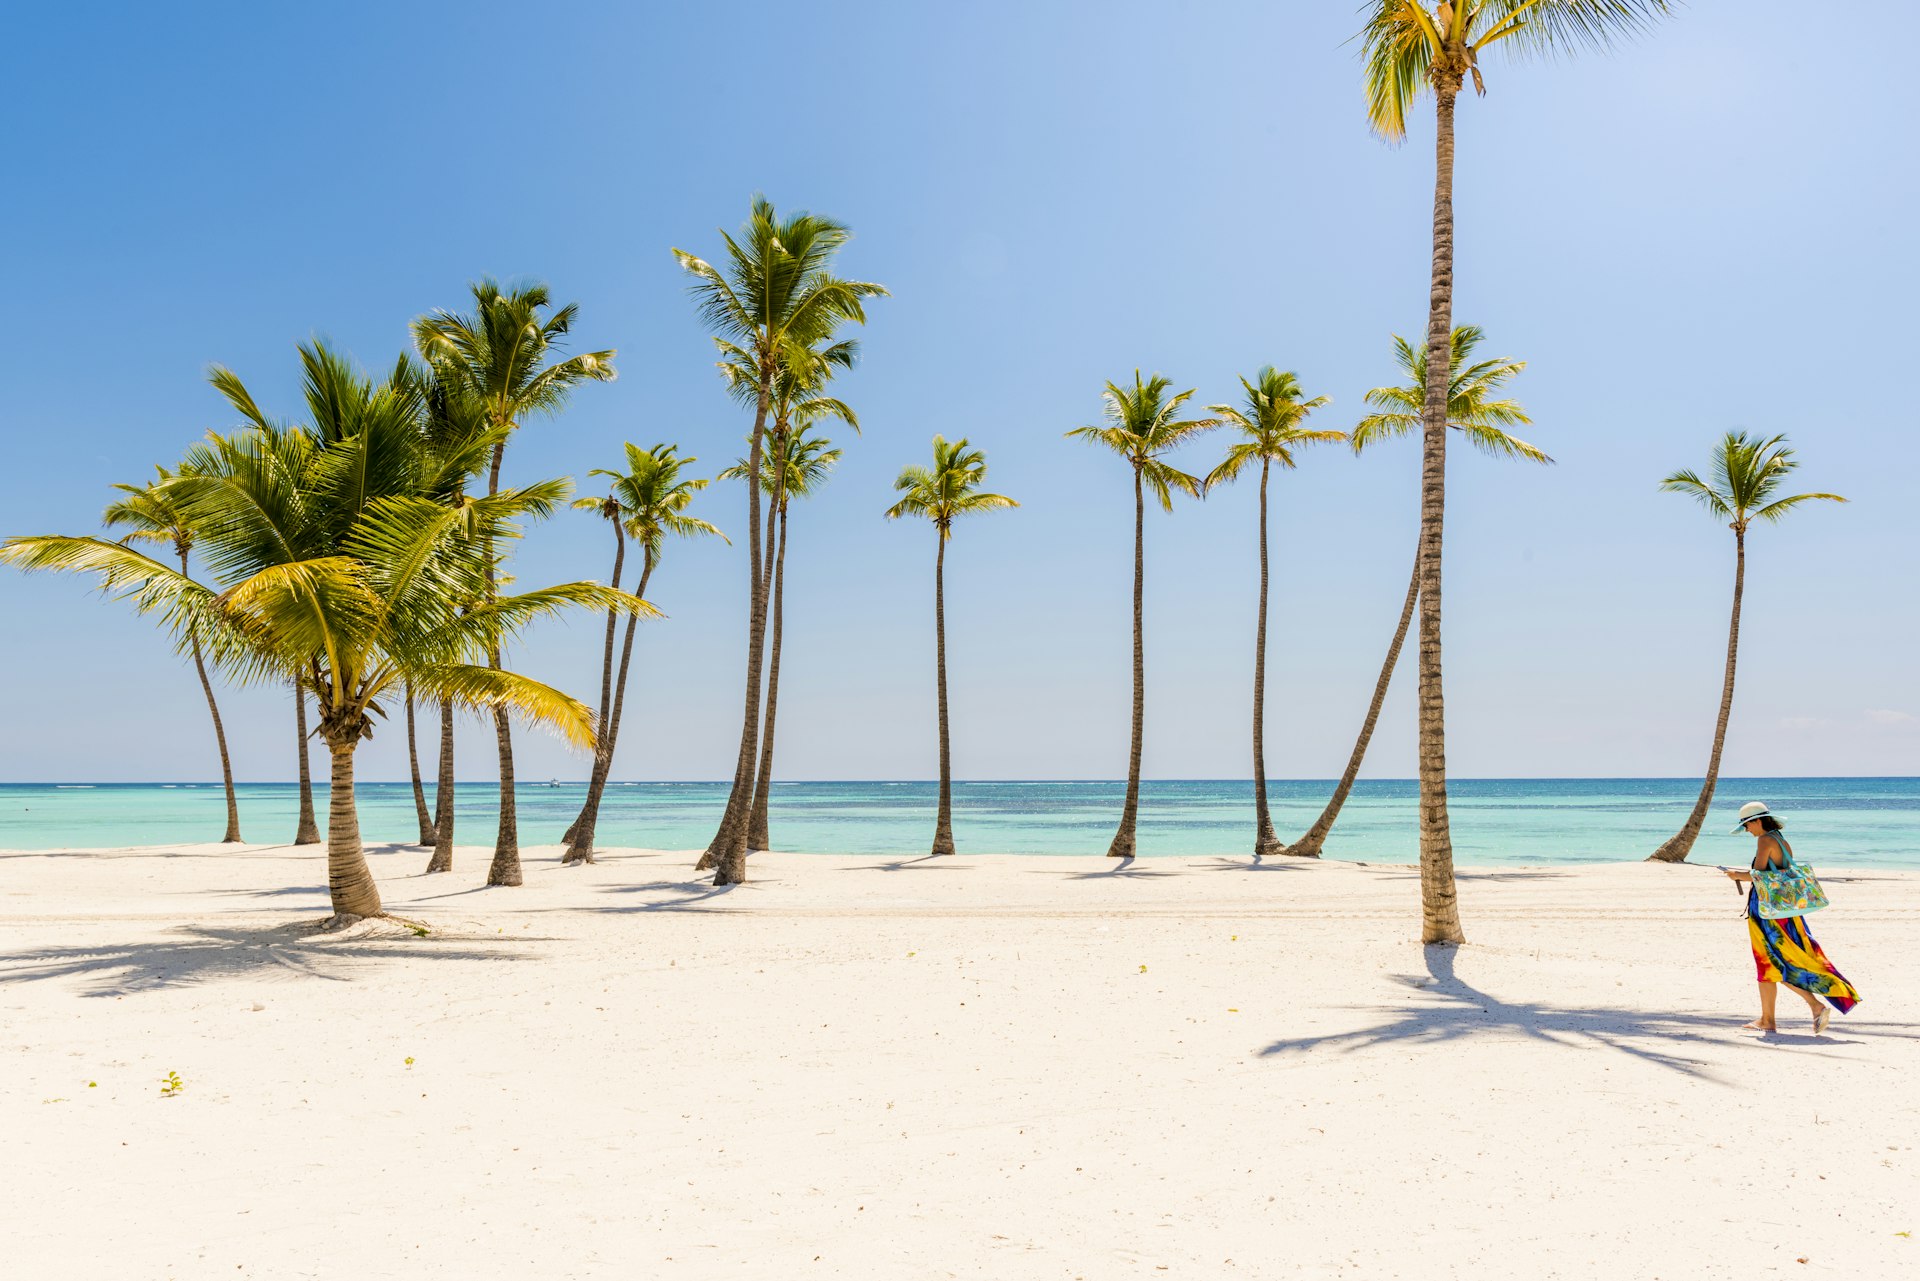 A woman walks on a gleaming white-sand beach that's dotted with palm trees at Punta Cana, Dominican Republic